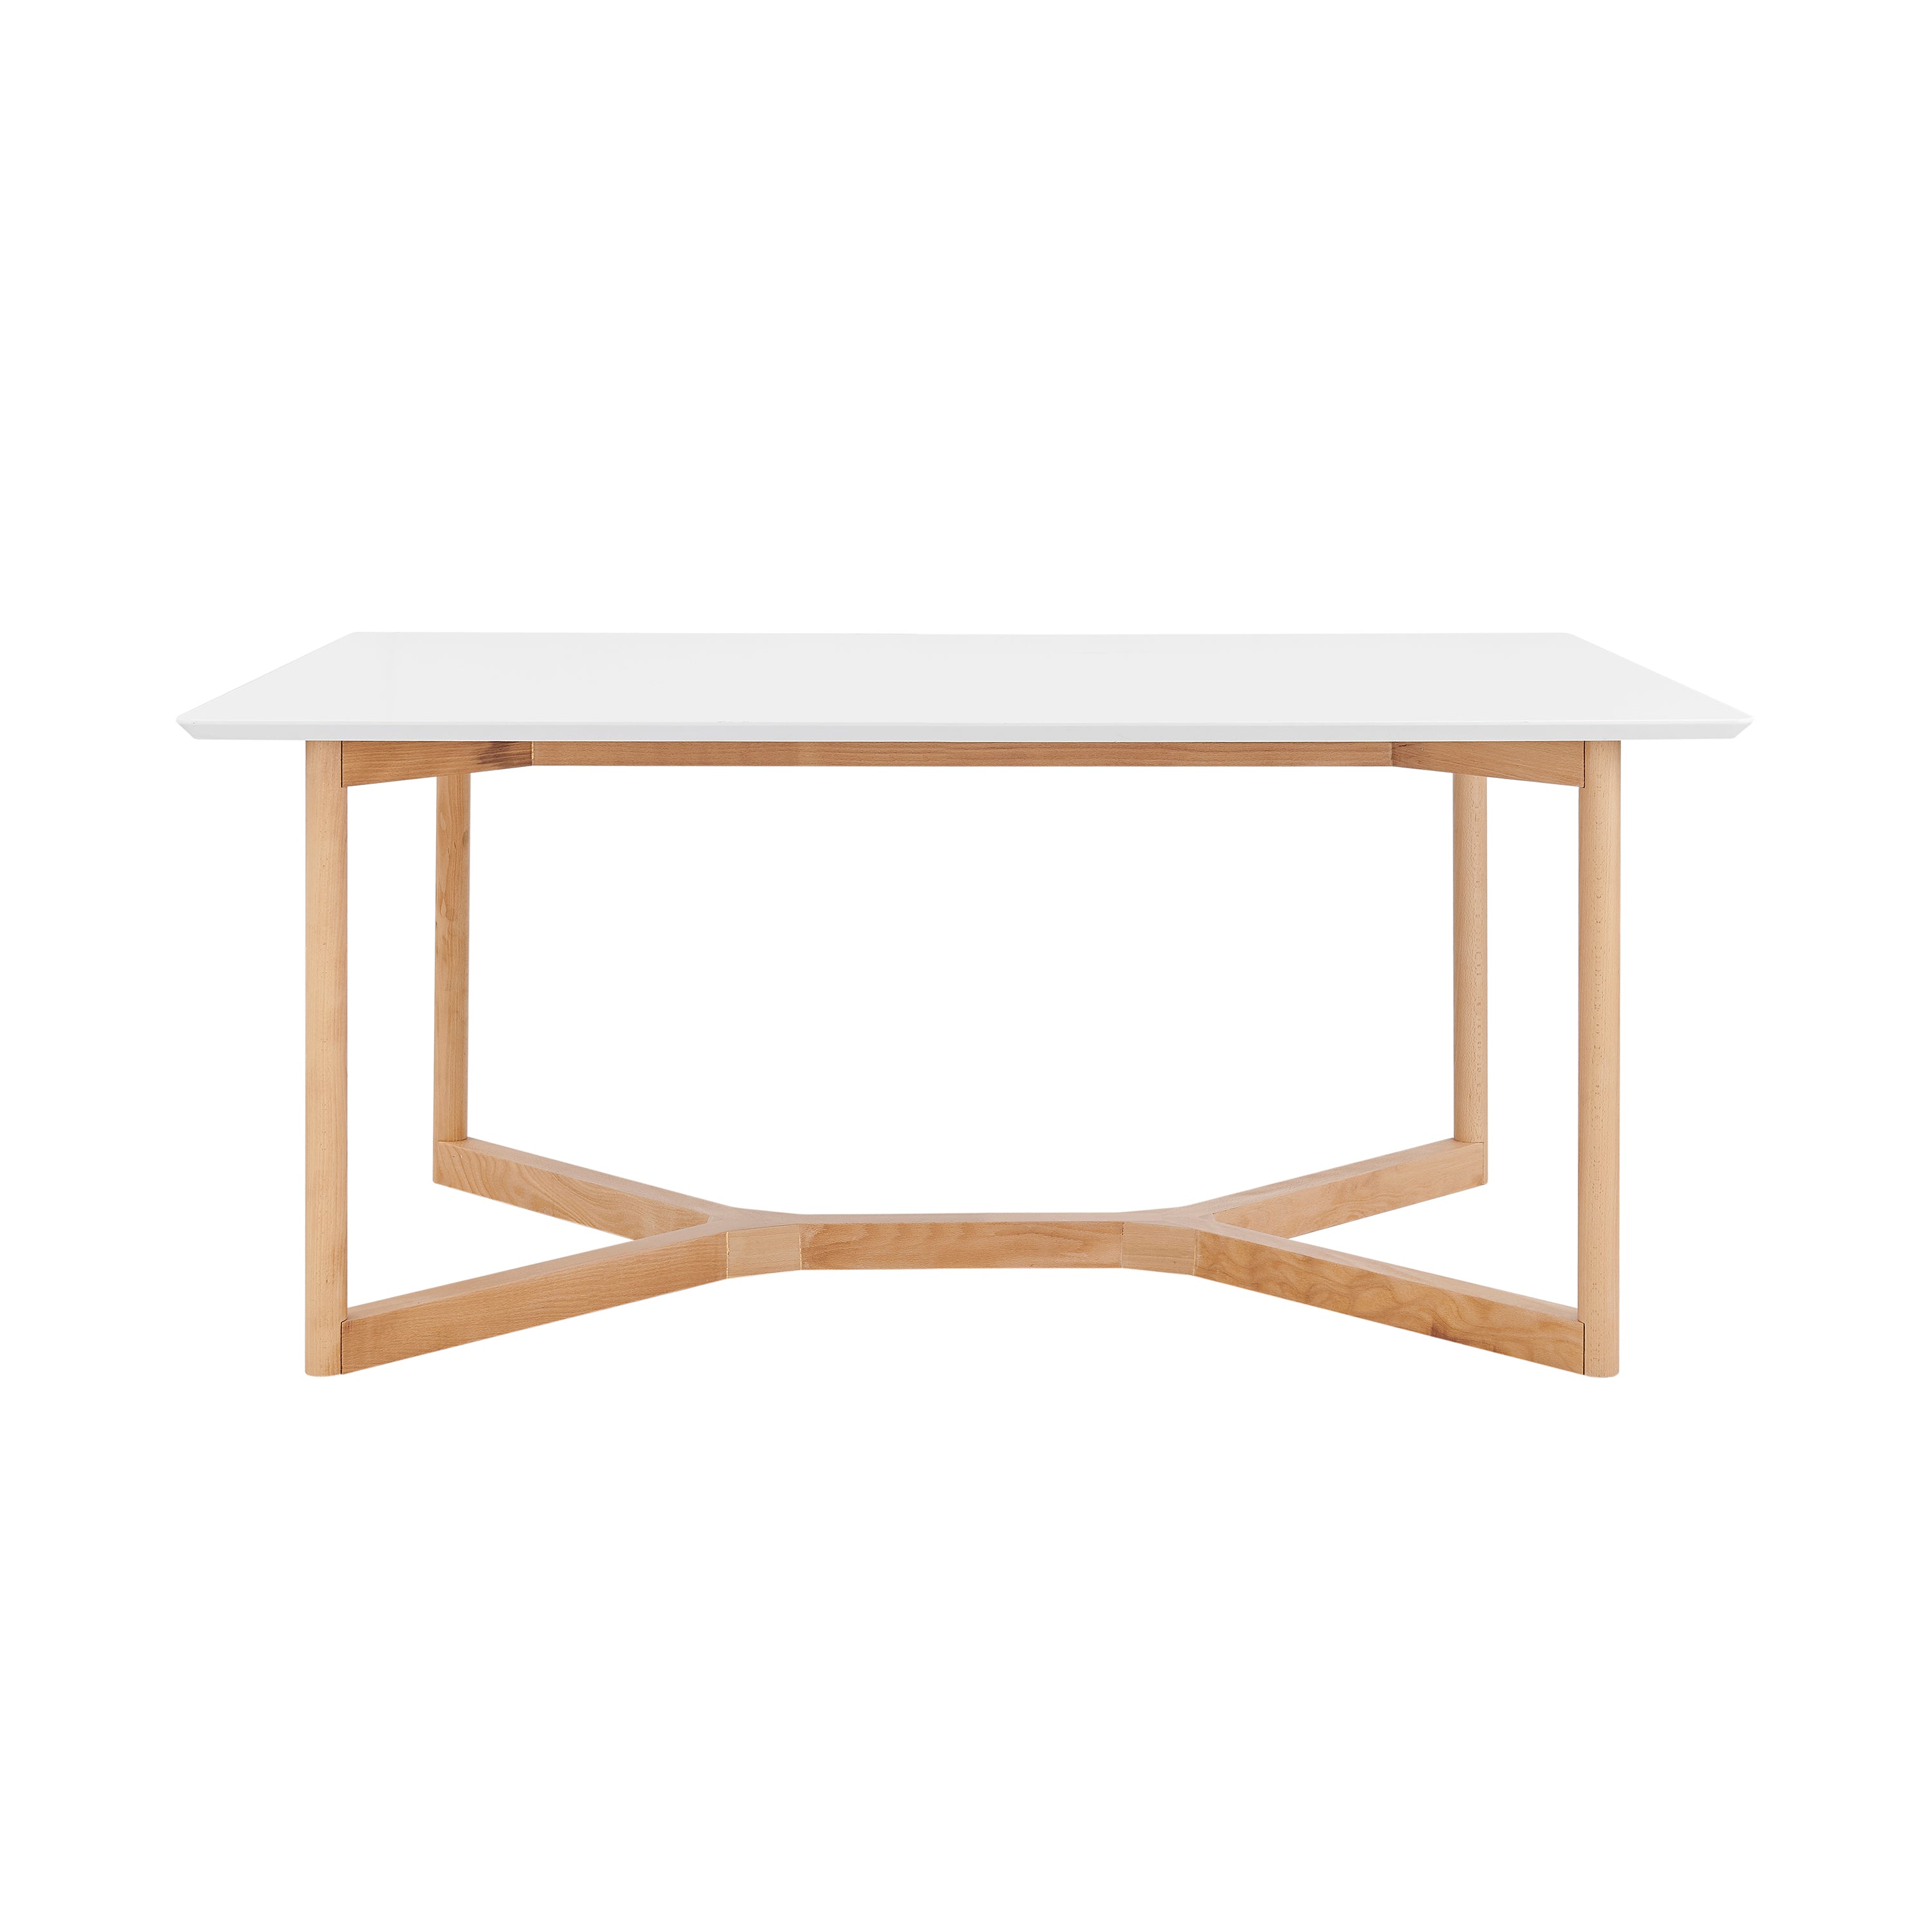 Euro Style Dining Tables - Aren 63" Rectangle Dining Table in Matte White with Natrual Wood Base